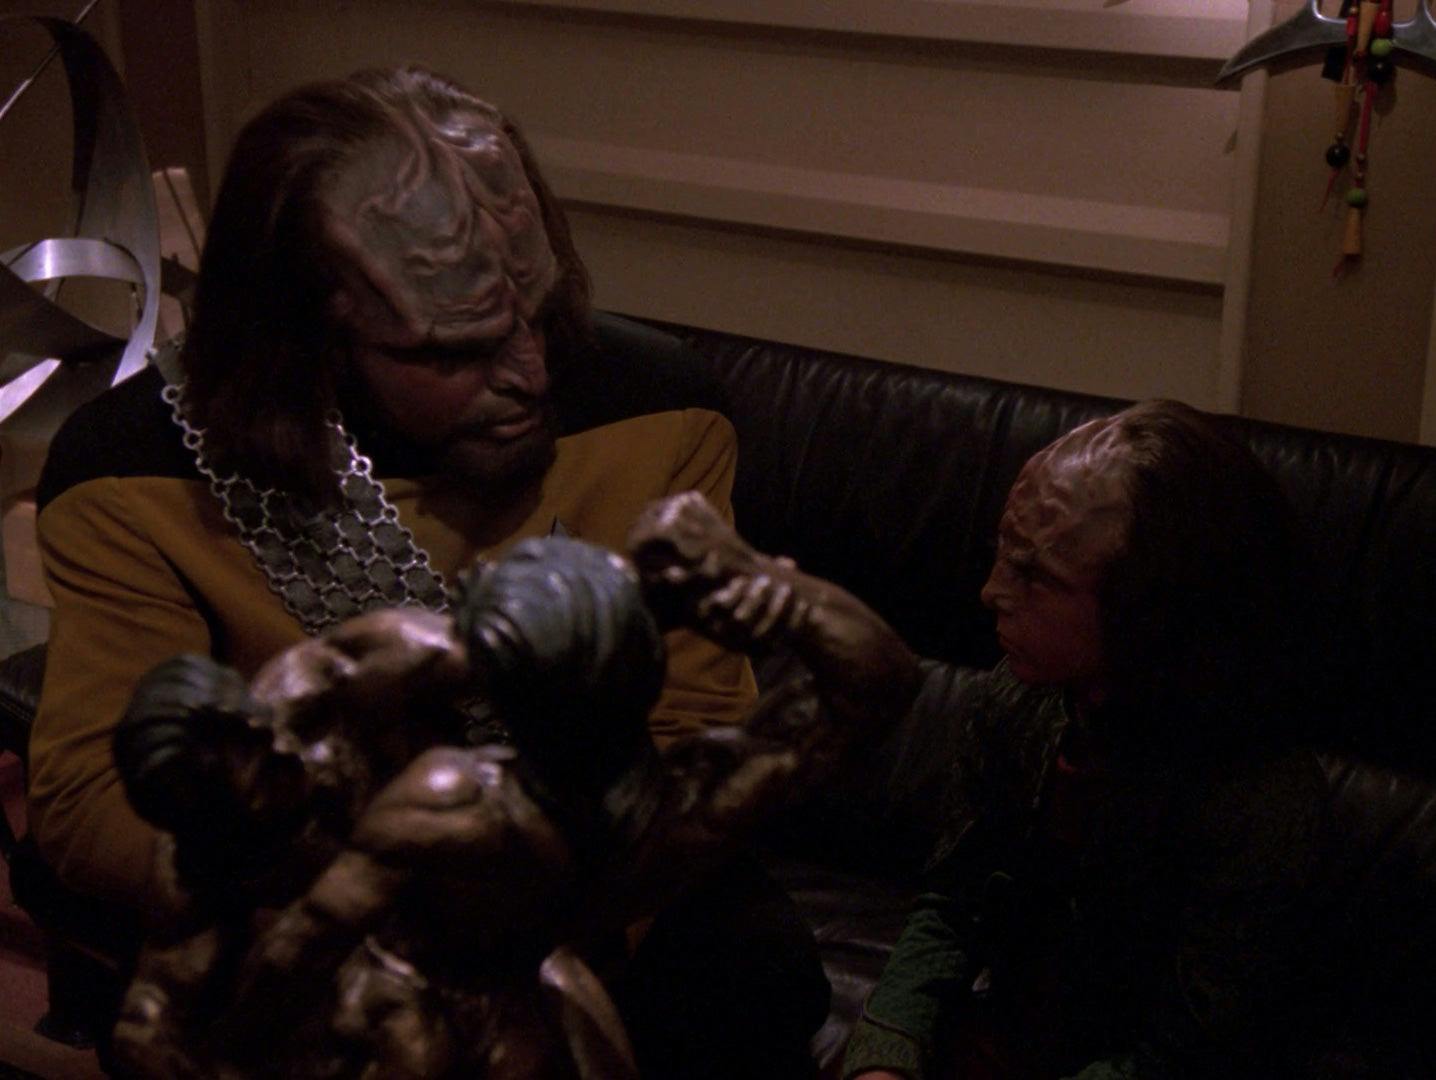 On the couch, Worf sits besides son Alexander for a talk on Star Trek: The Next Generation